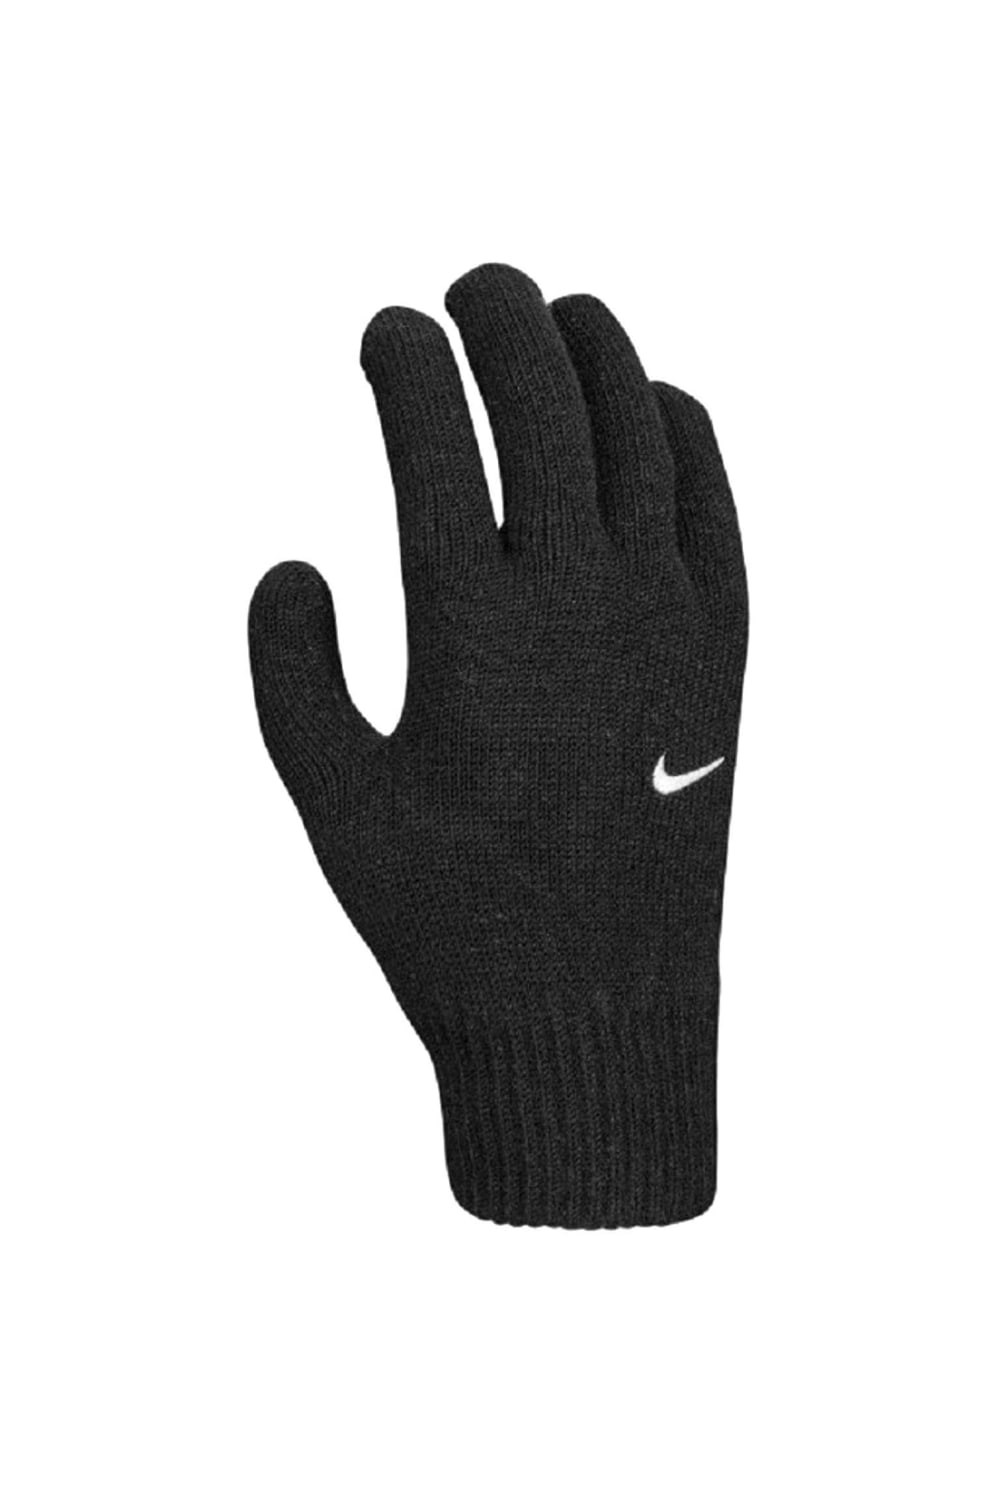 Swoosh 2. 0 Mens Knitted Gloves -